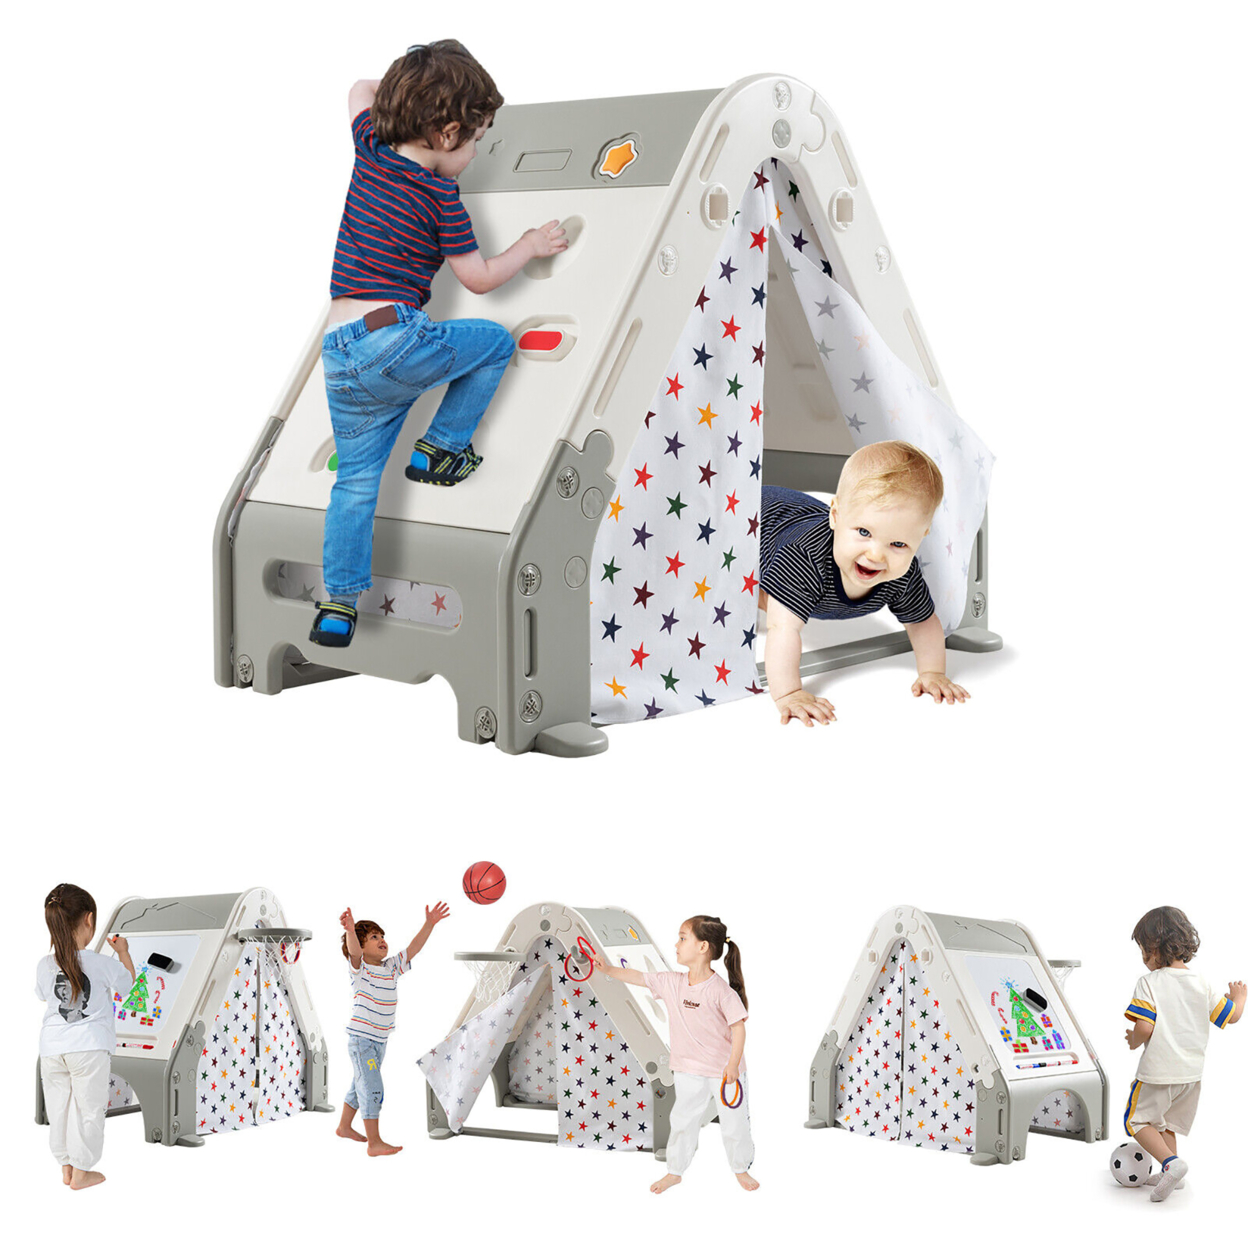 Kids Triangle Climber Hideaway Play Tent House W/ Climbing Wall& White Board